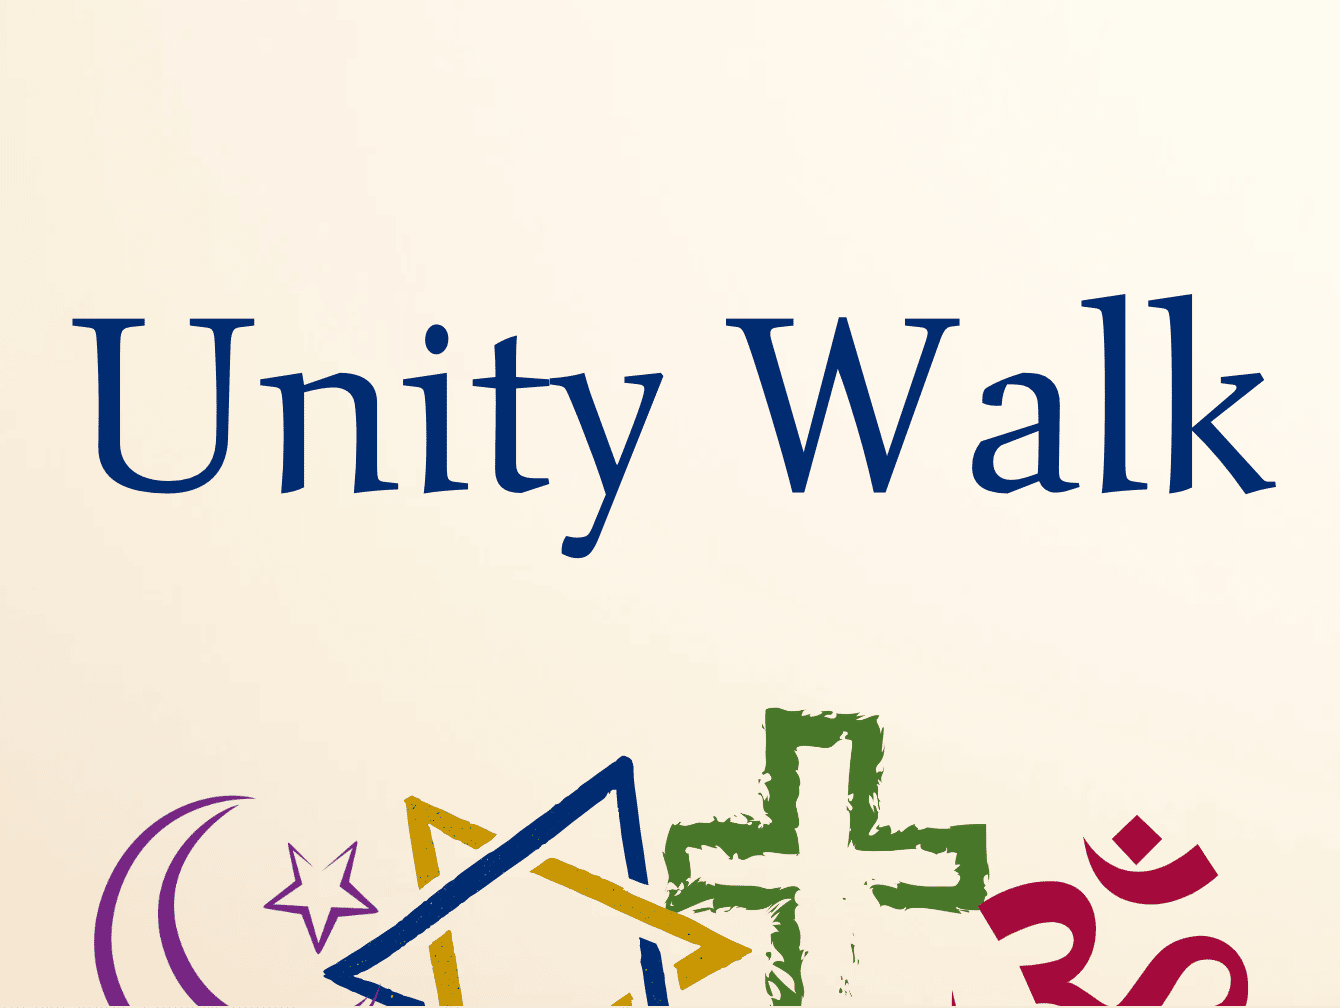 graphic with "Unity Walk" in text and religious symbols below